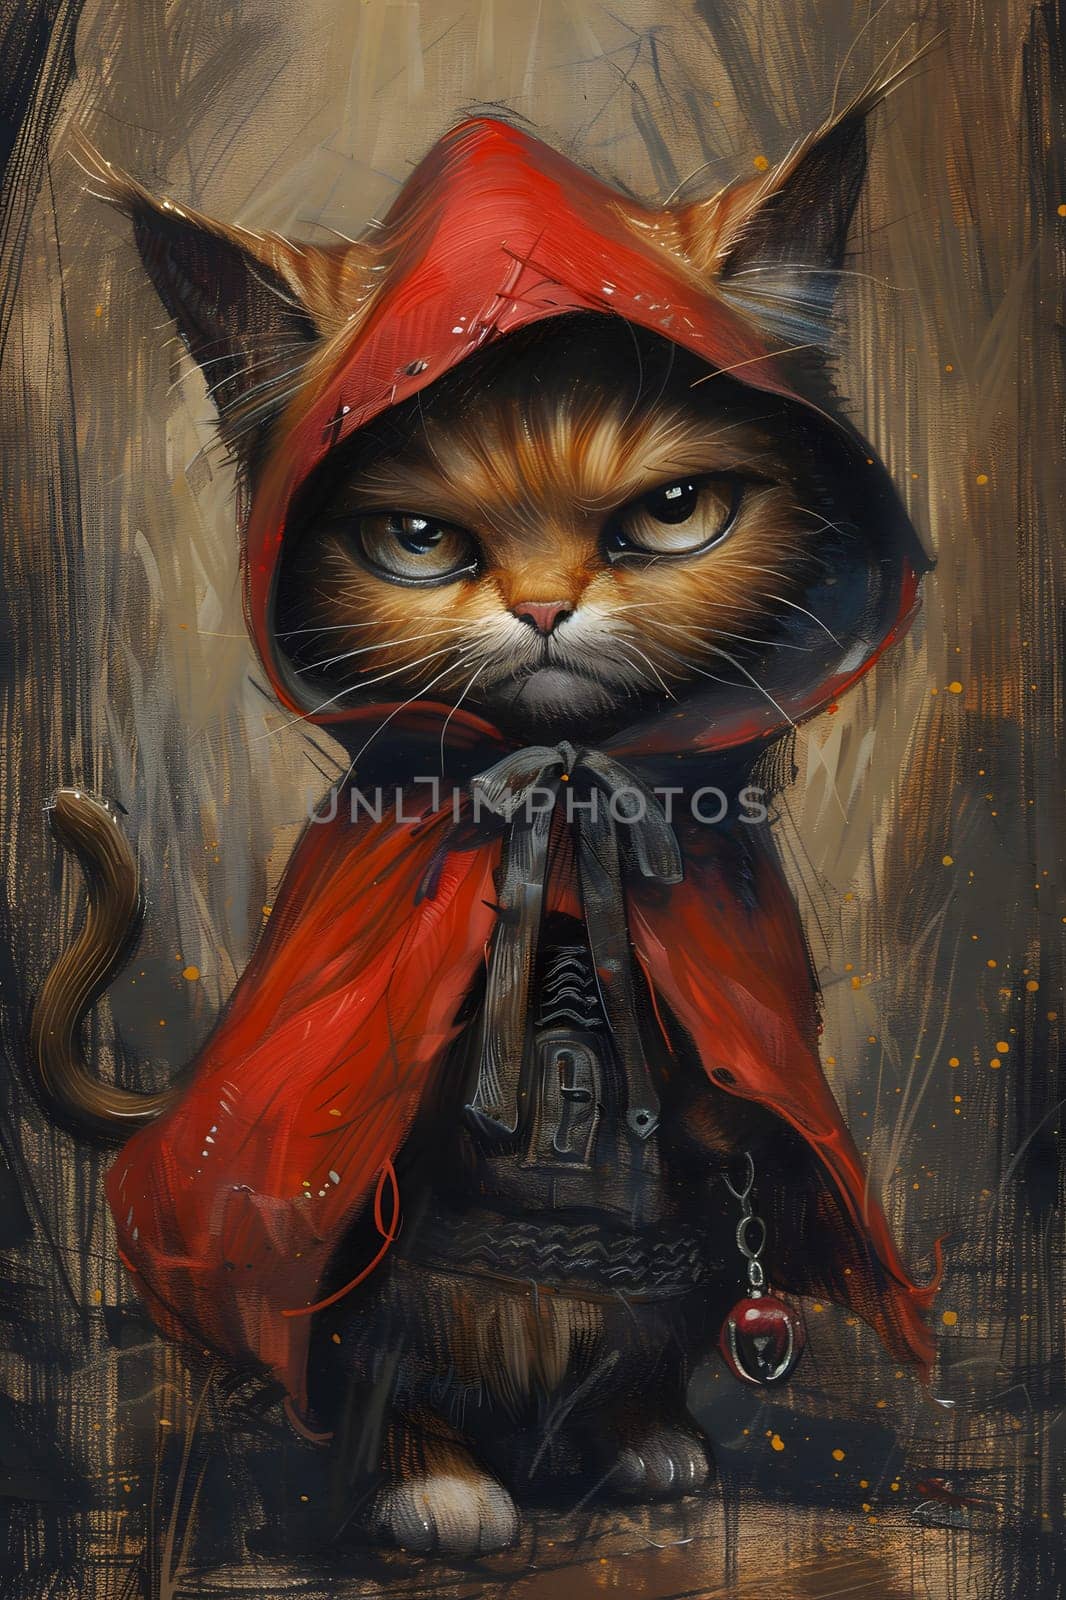 A painting depicting a small to mediumsized Felidae wearing a red cape, with whiskers and a snout painted in detail. This art piece showcases the Carnivore cat in a unique and whimsical way